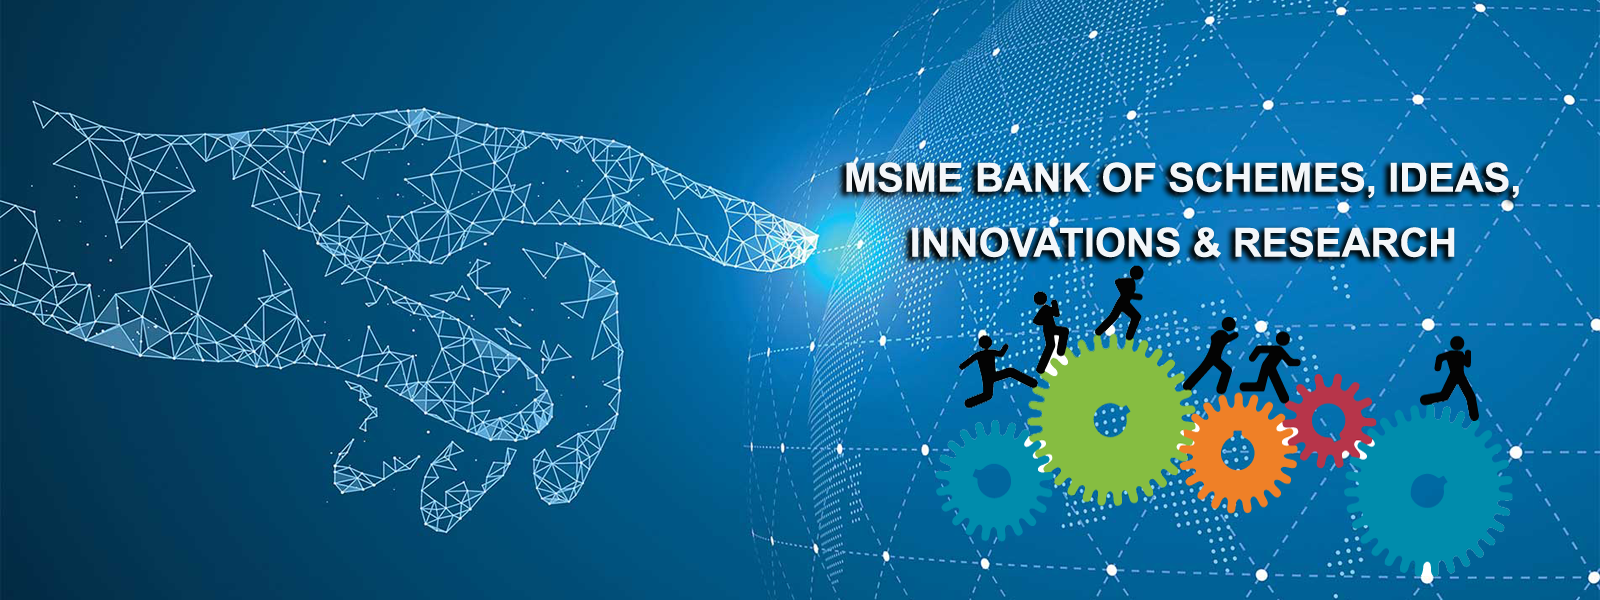 MSME Bank of Ideas, Innovations & Research